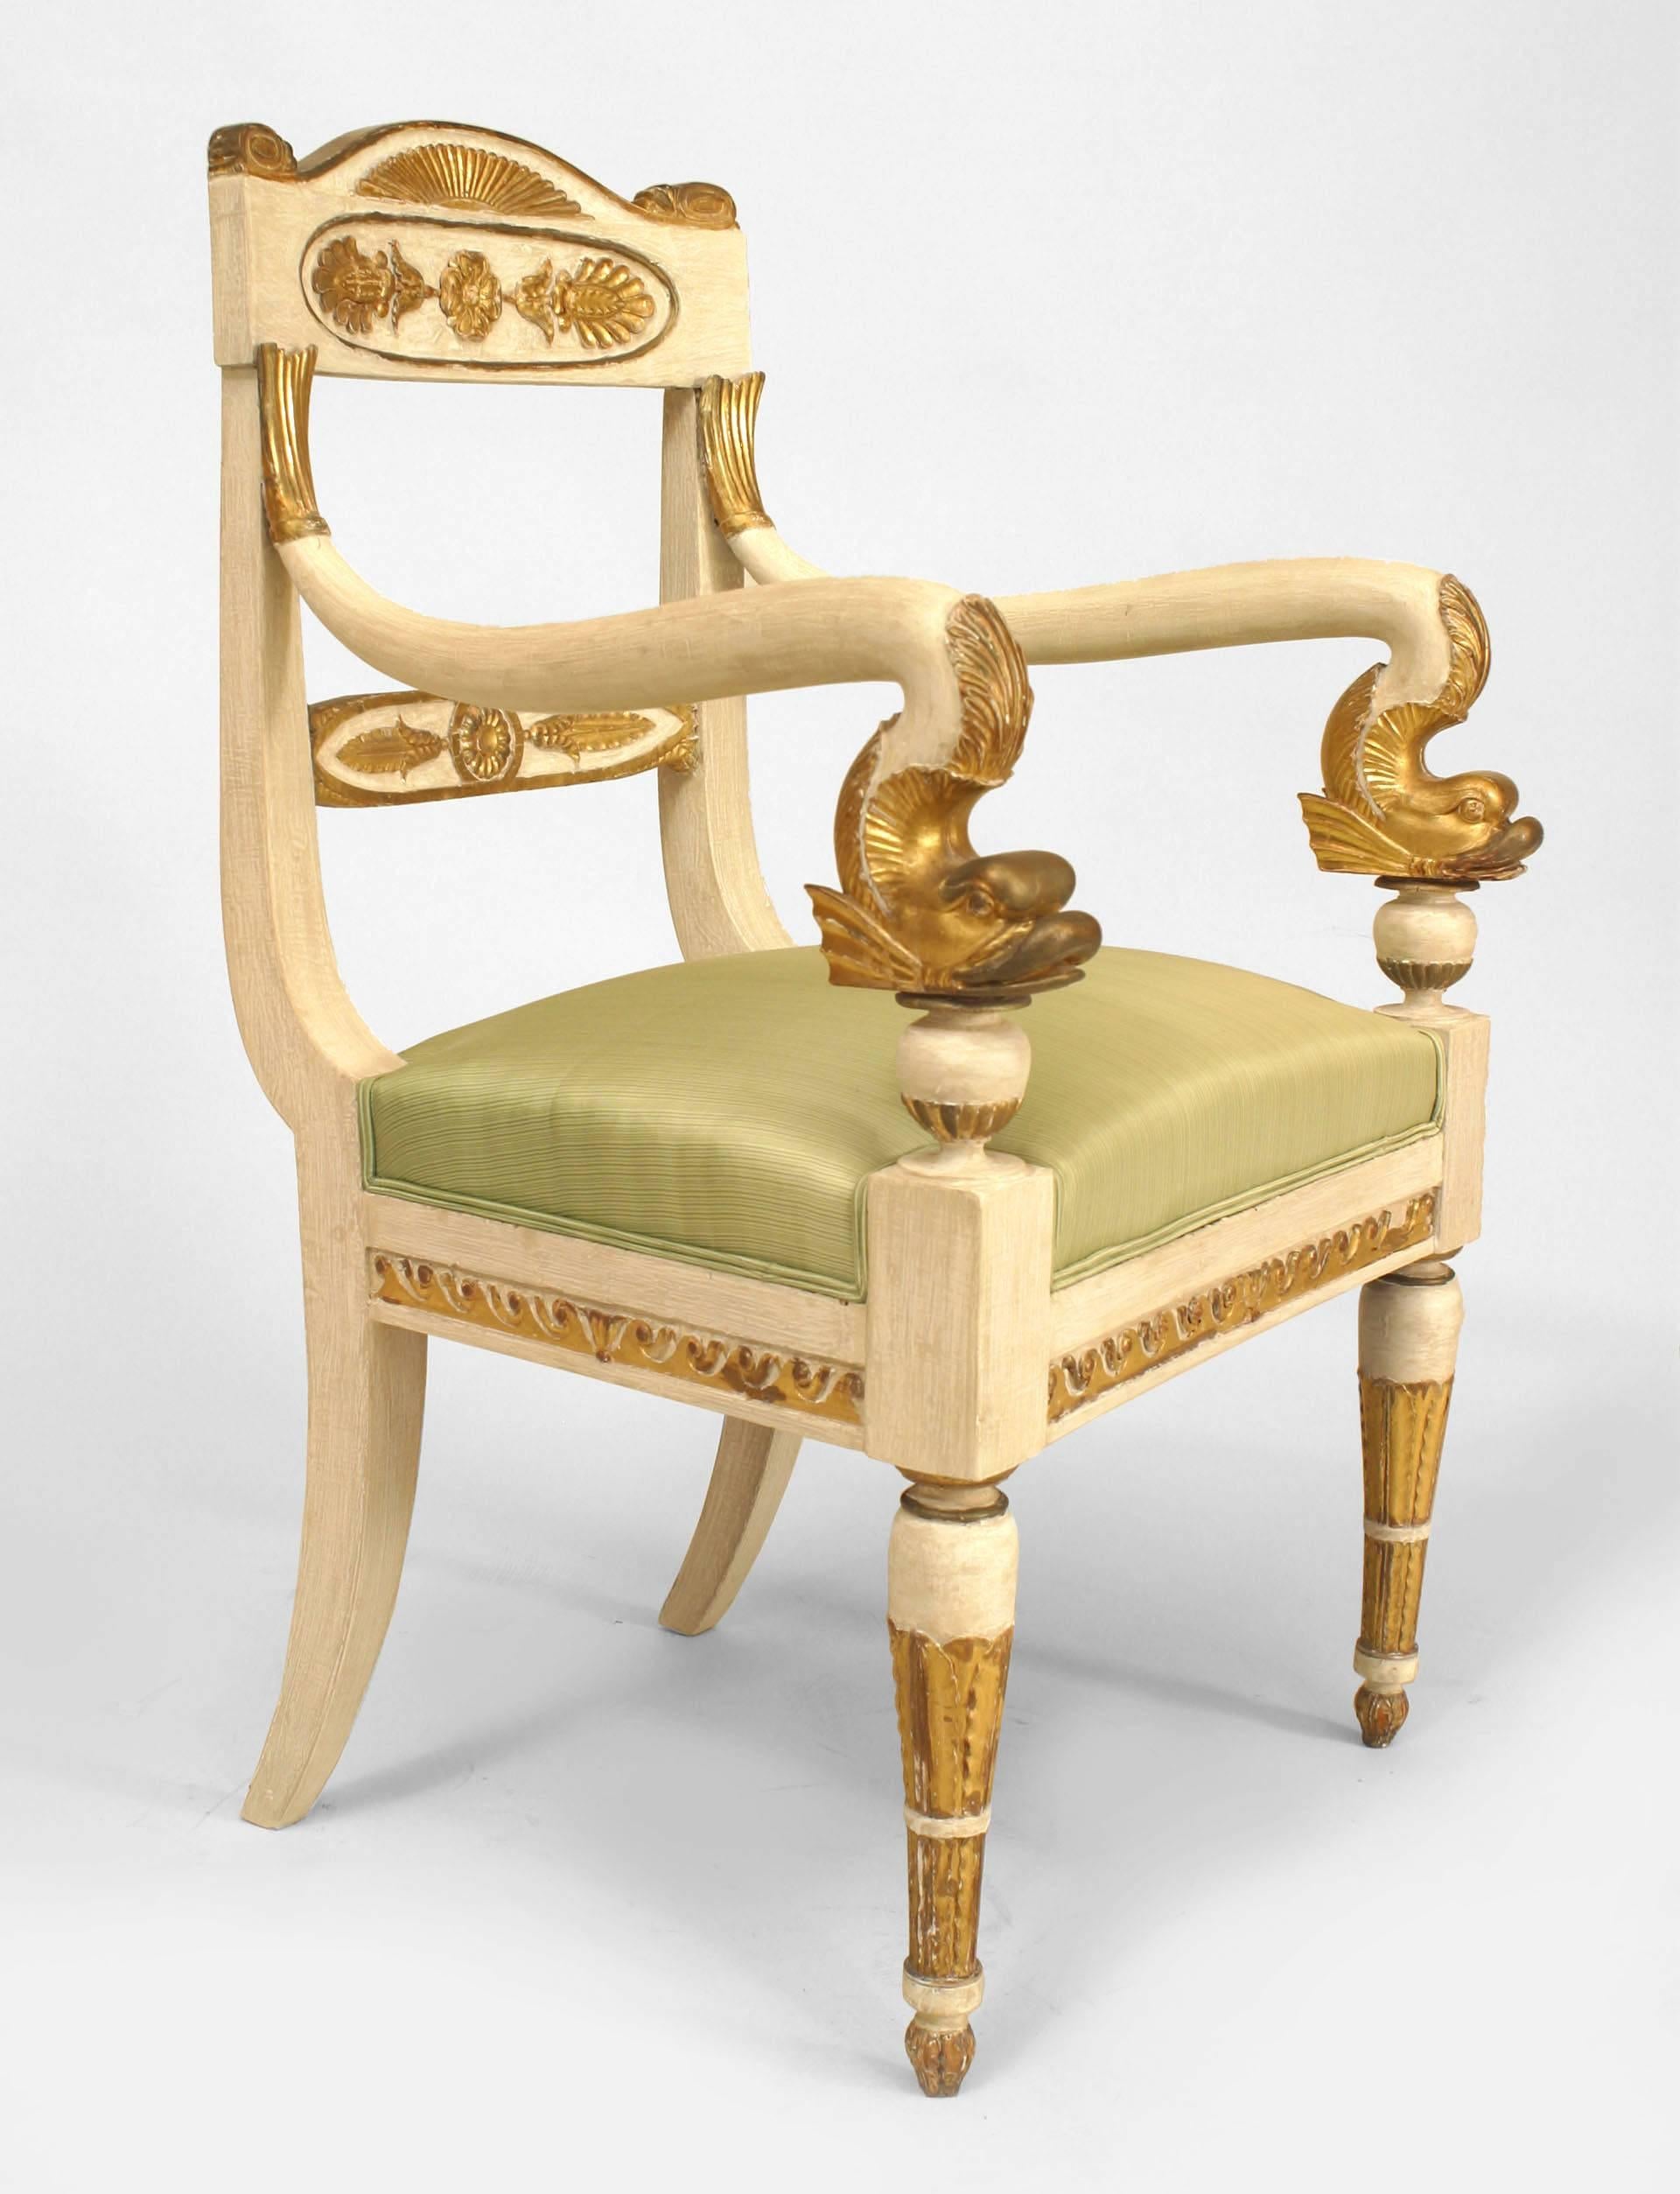 Neoclassical Pair of Early 19th c. Gilt Carved Italian Neoclassic Chairs